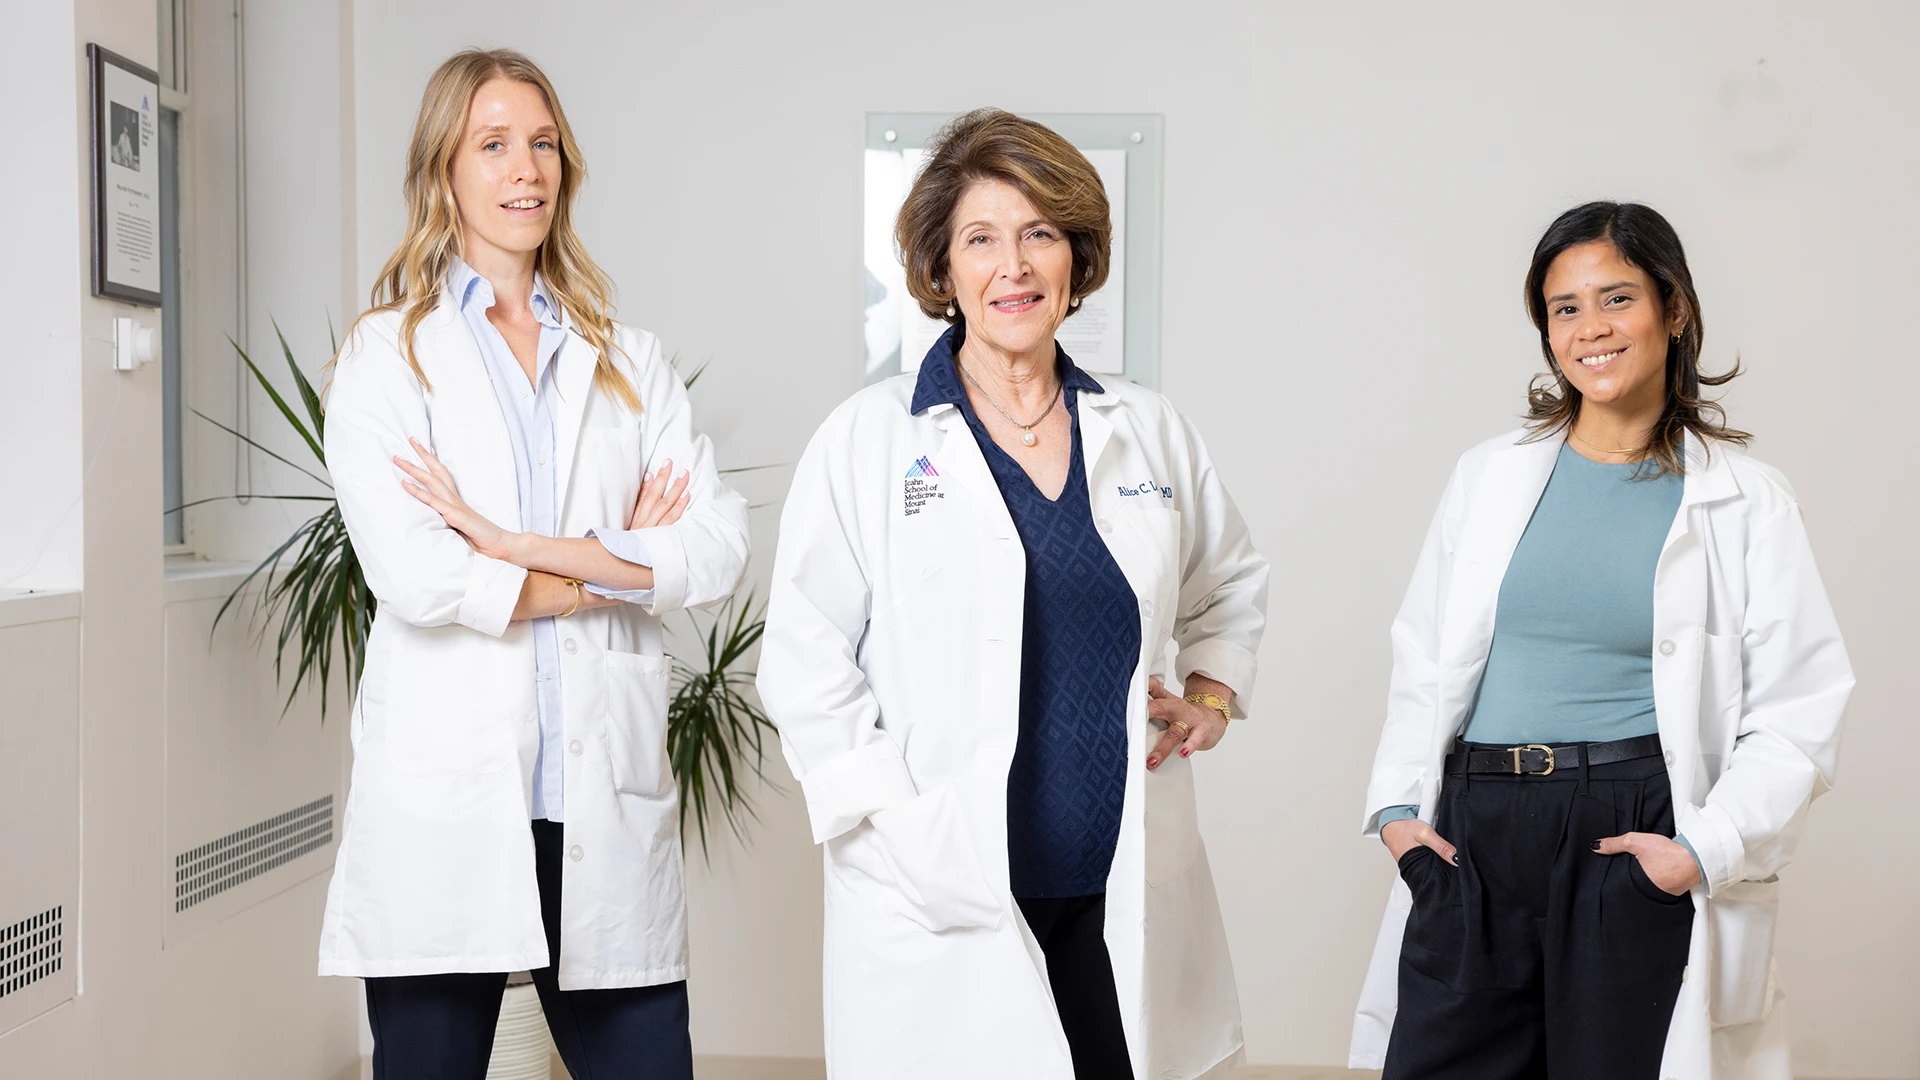 From left: Rachel Sheskier, MD, Alice C. Levine, MD, and Natalia Viera Feliciano, MD,